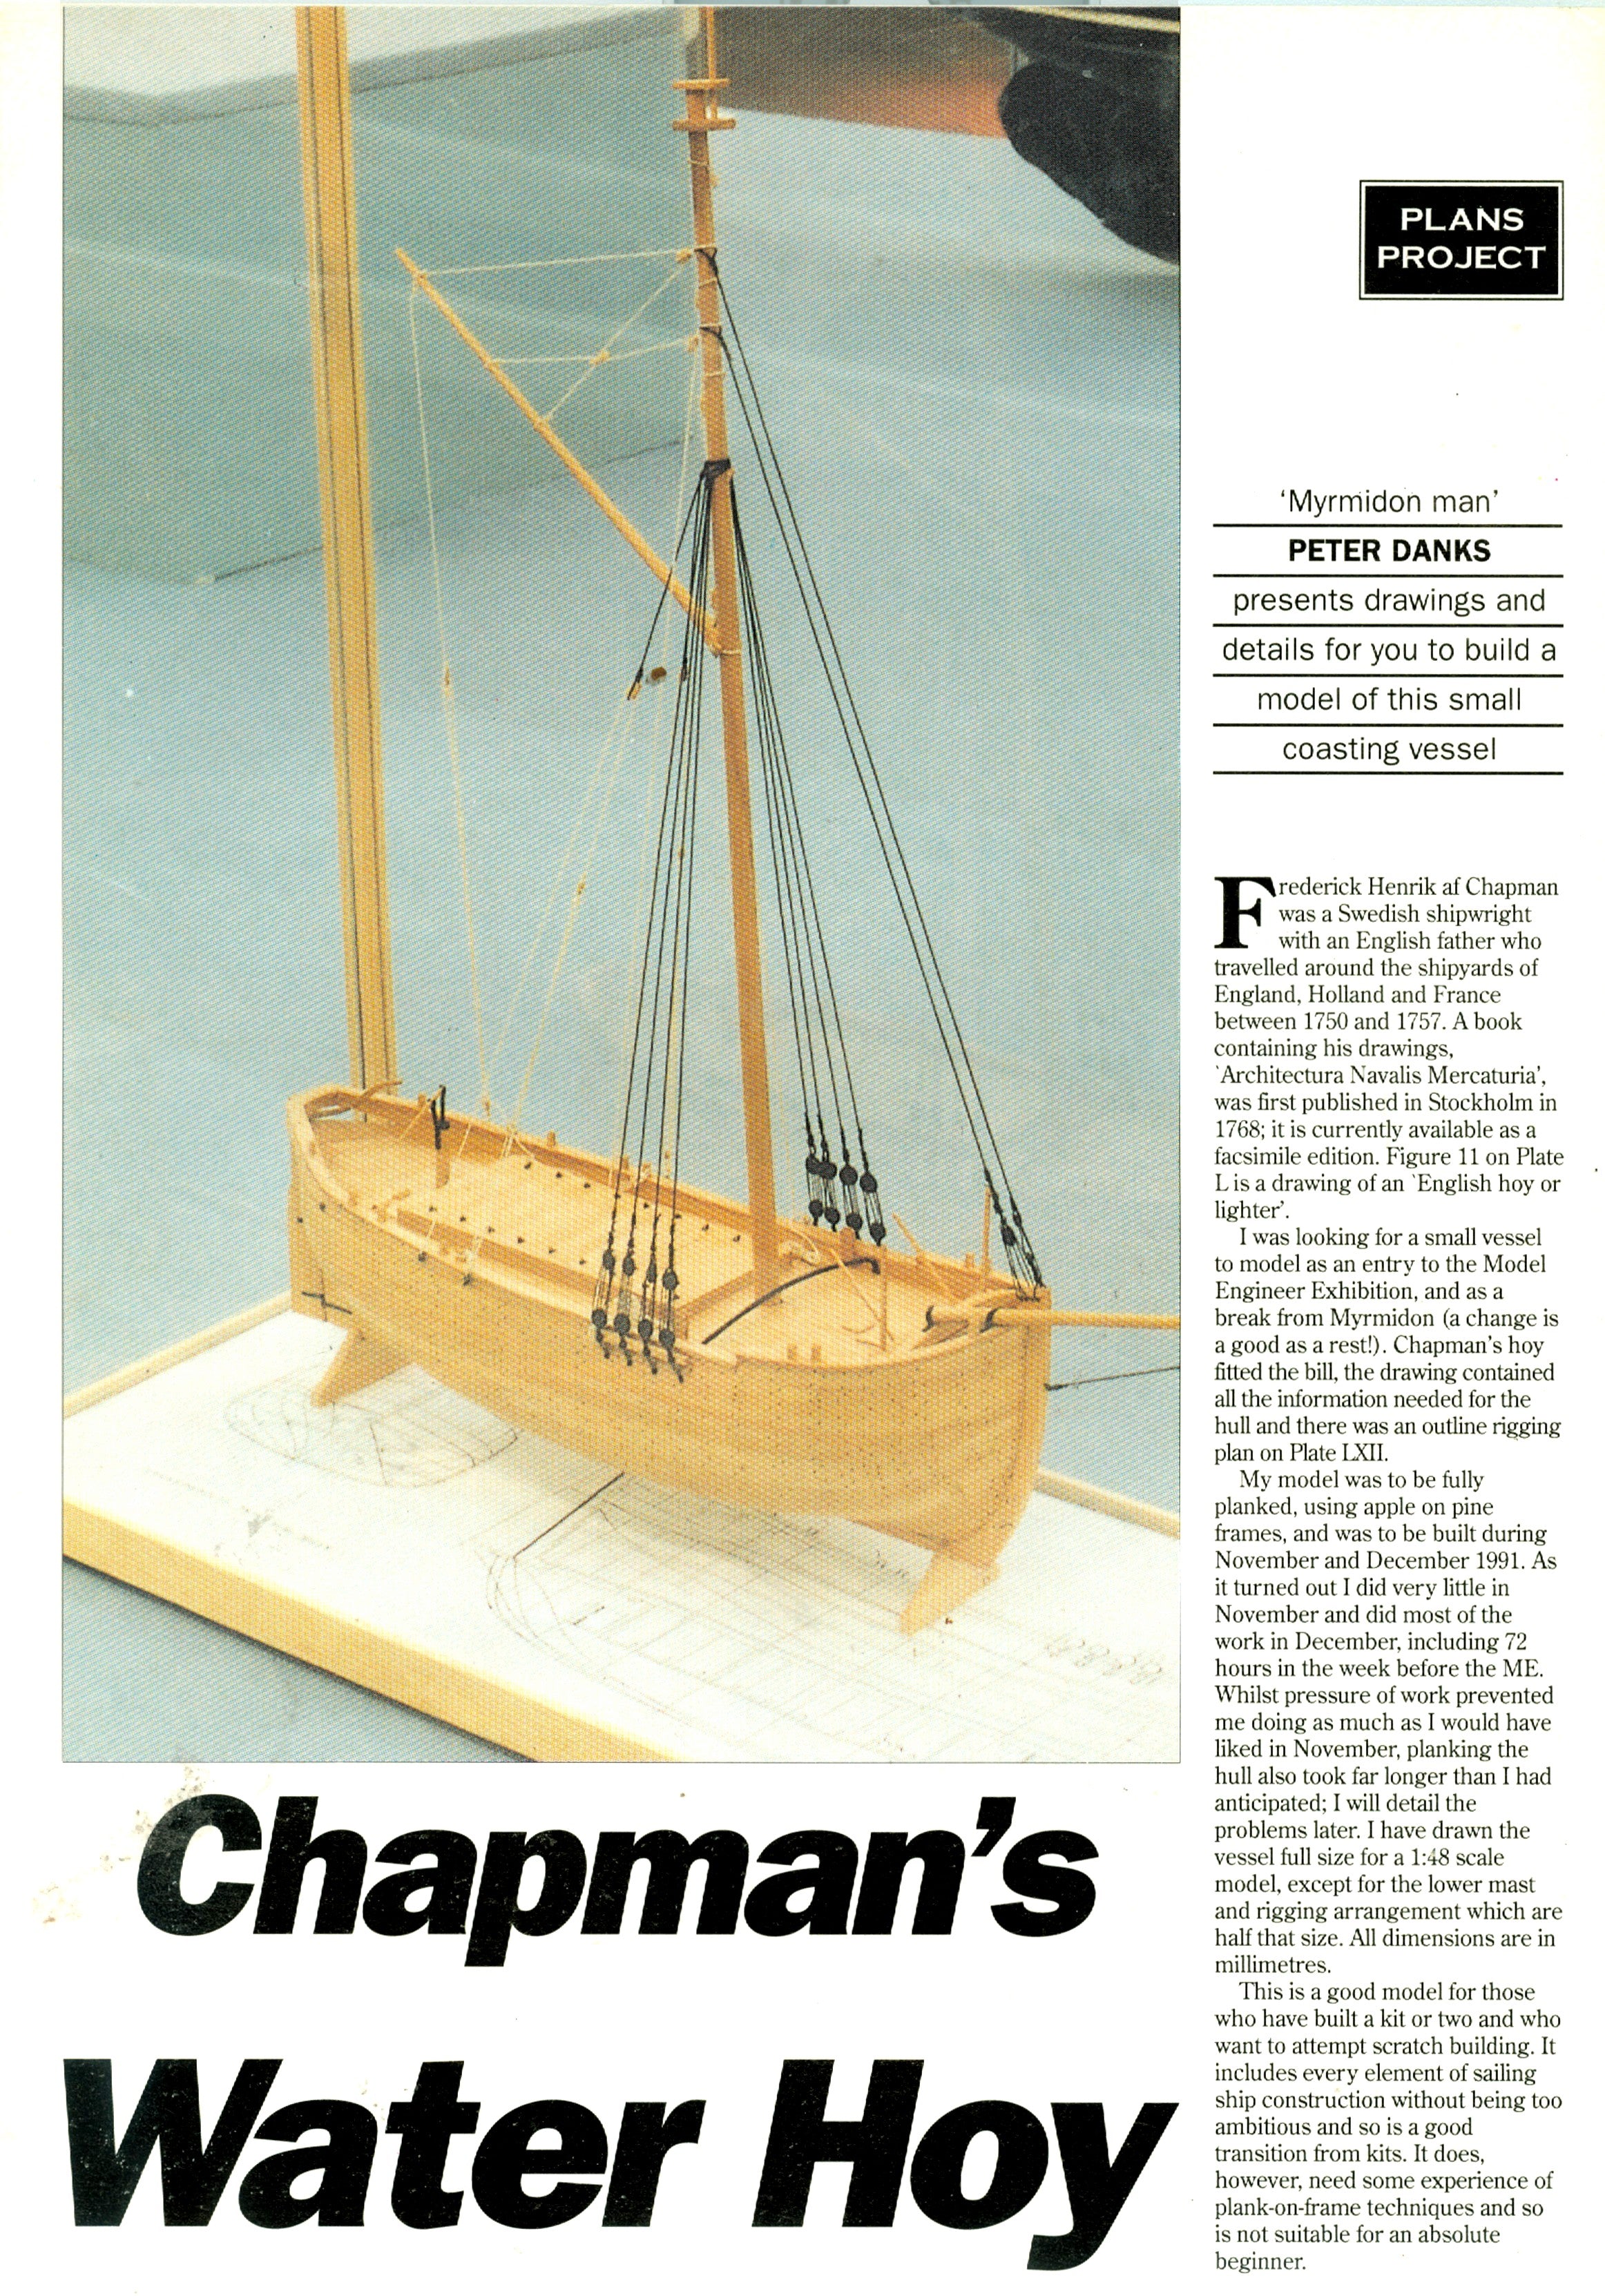 full size printed plans  display model small coasting vessel chapman's water hoy